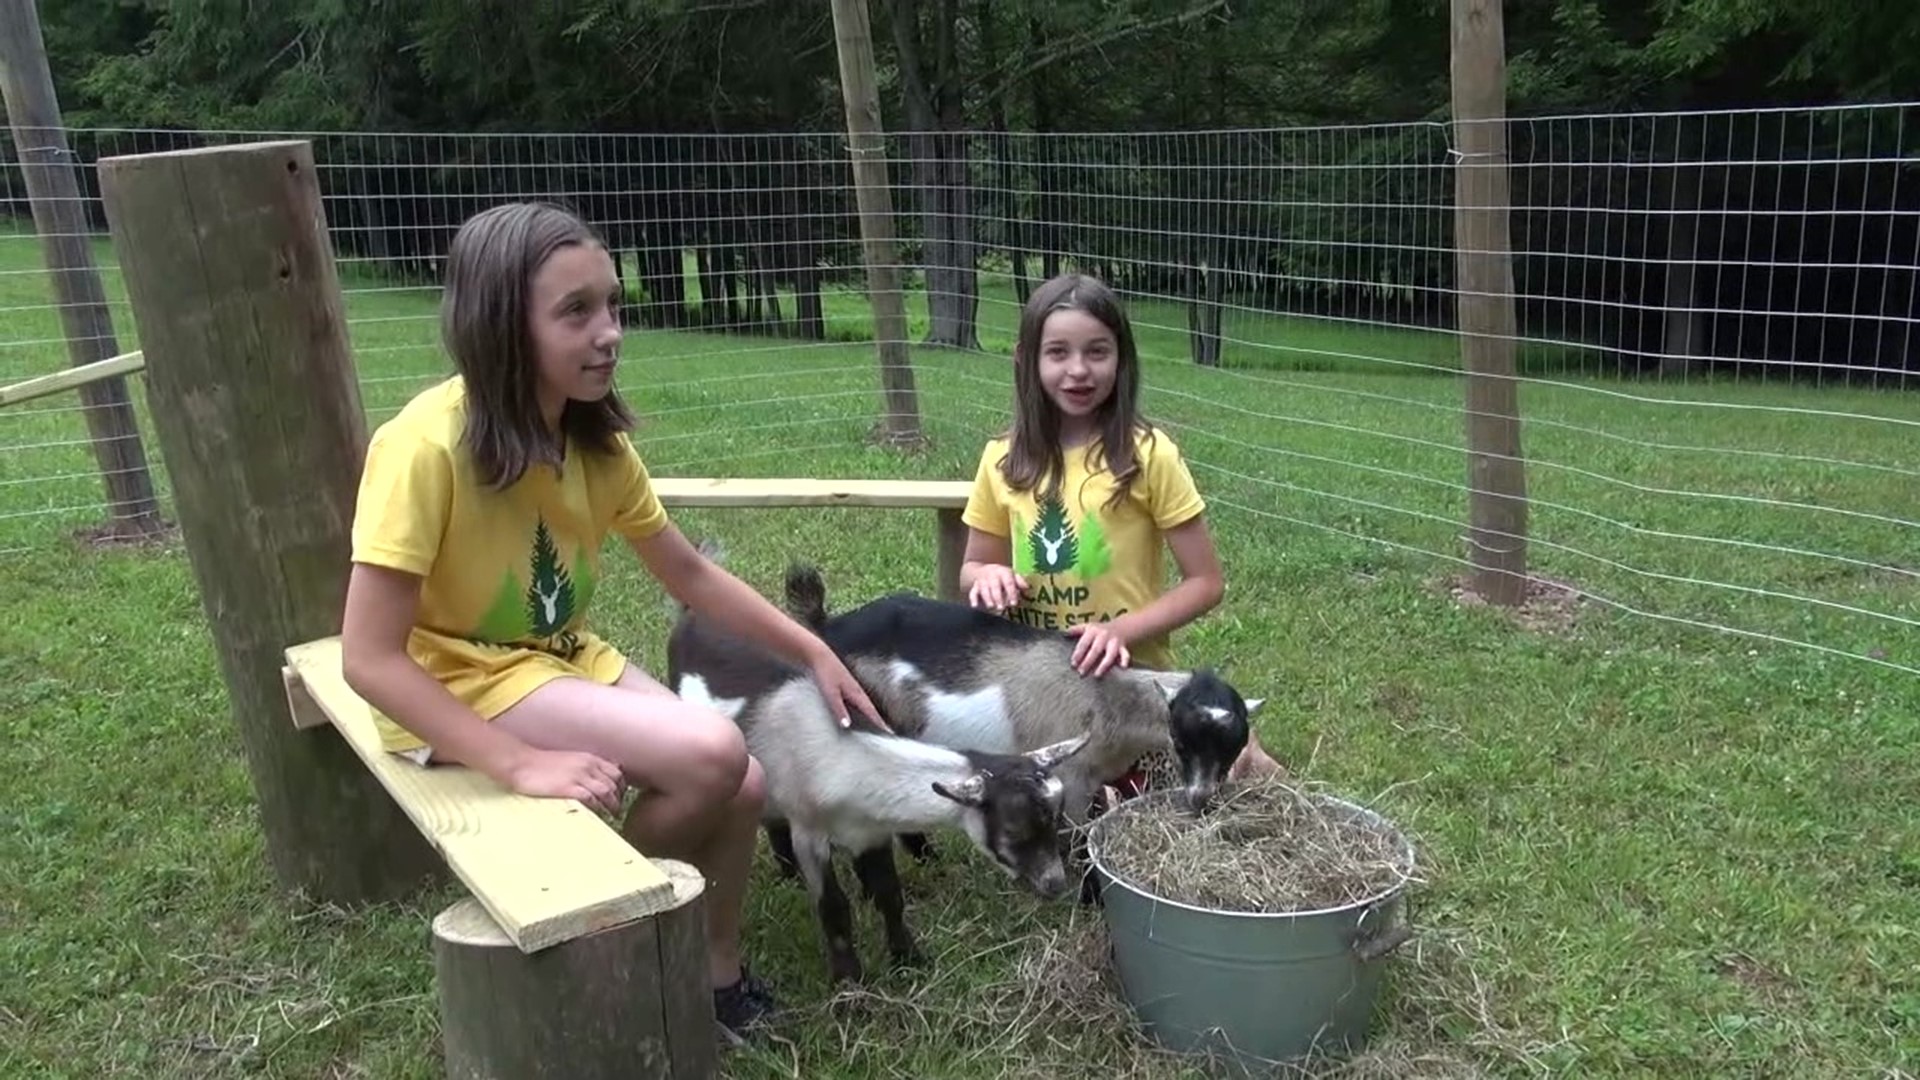 Newswatch 16's Courtney Harrison shows us where one camp in Wayne County is giving kids a hands-on experience in farming and nature.